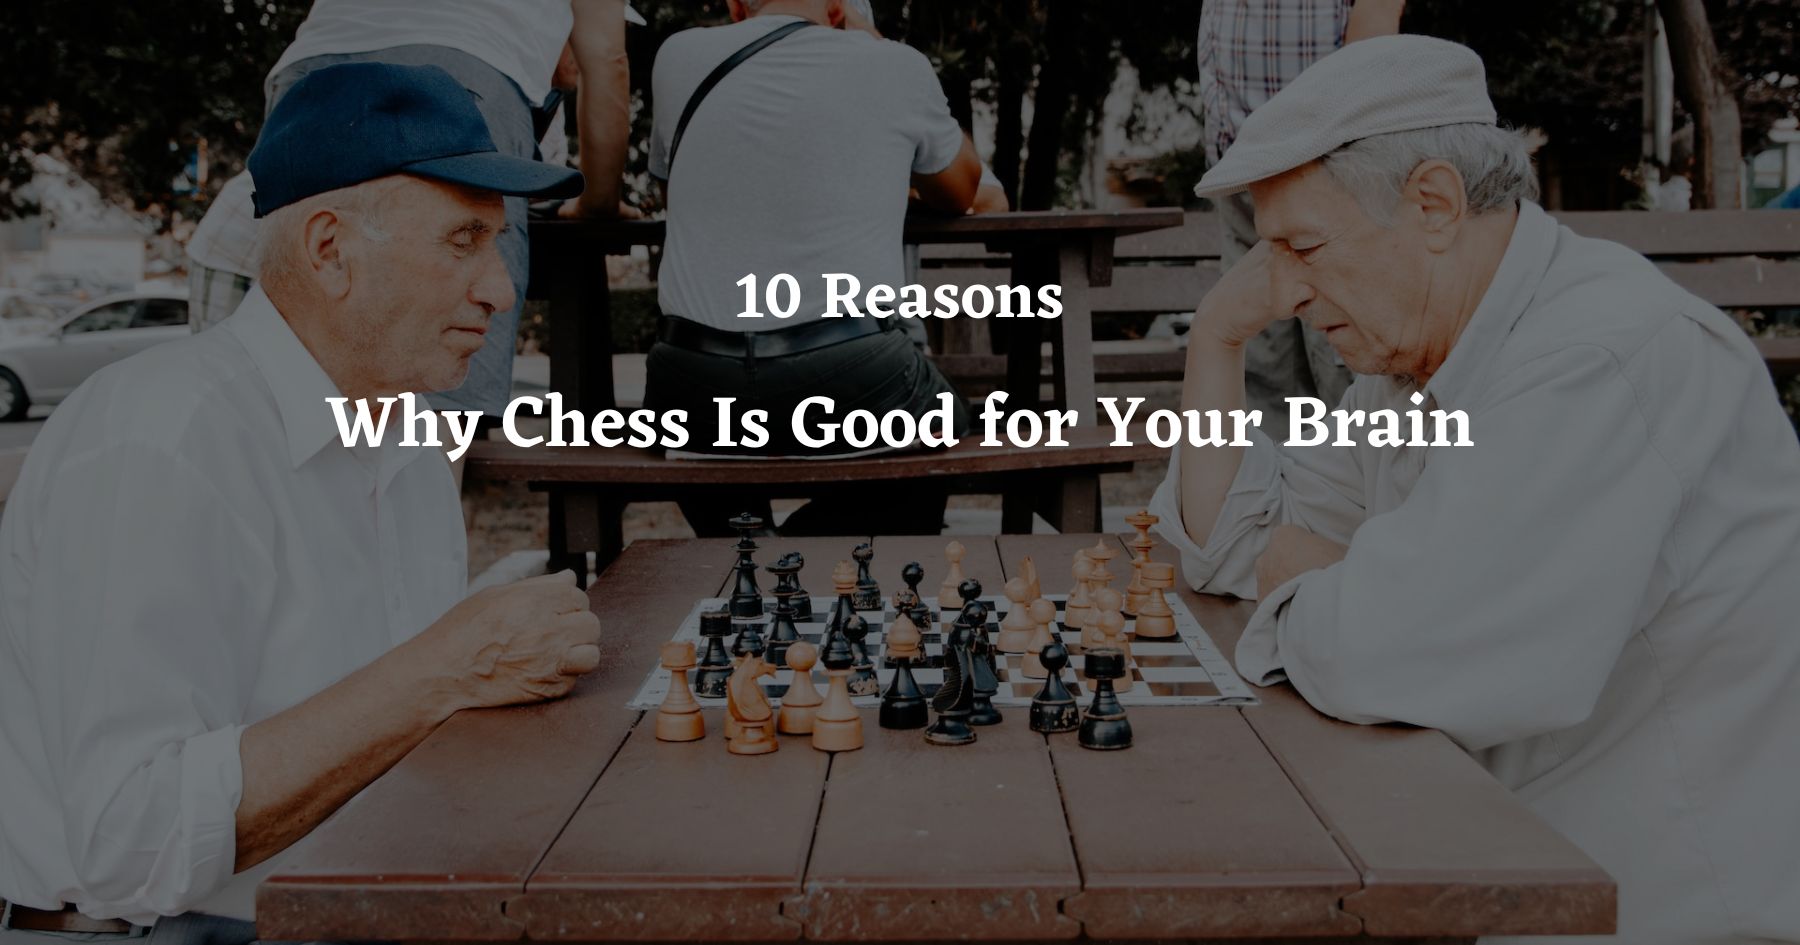 10 Reasons Why Chess Is Good for Your Brain